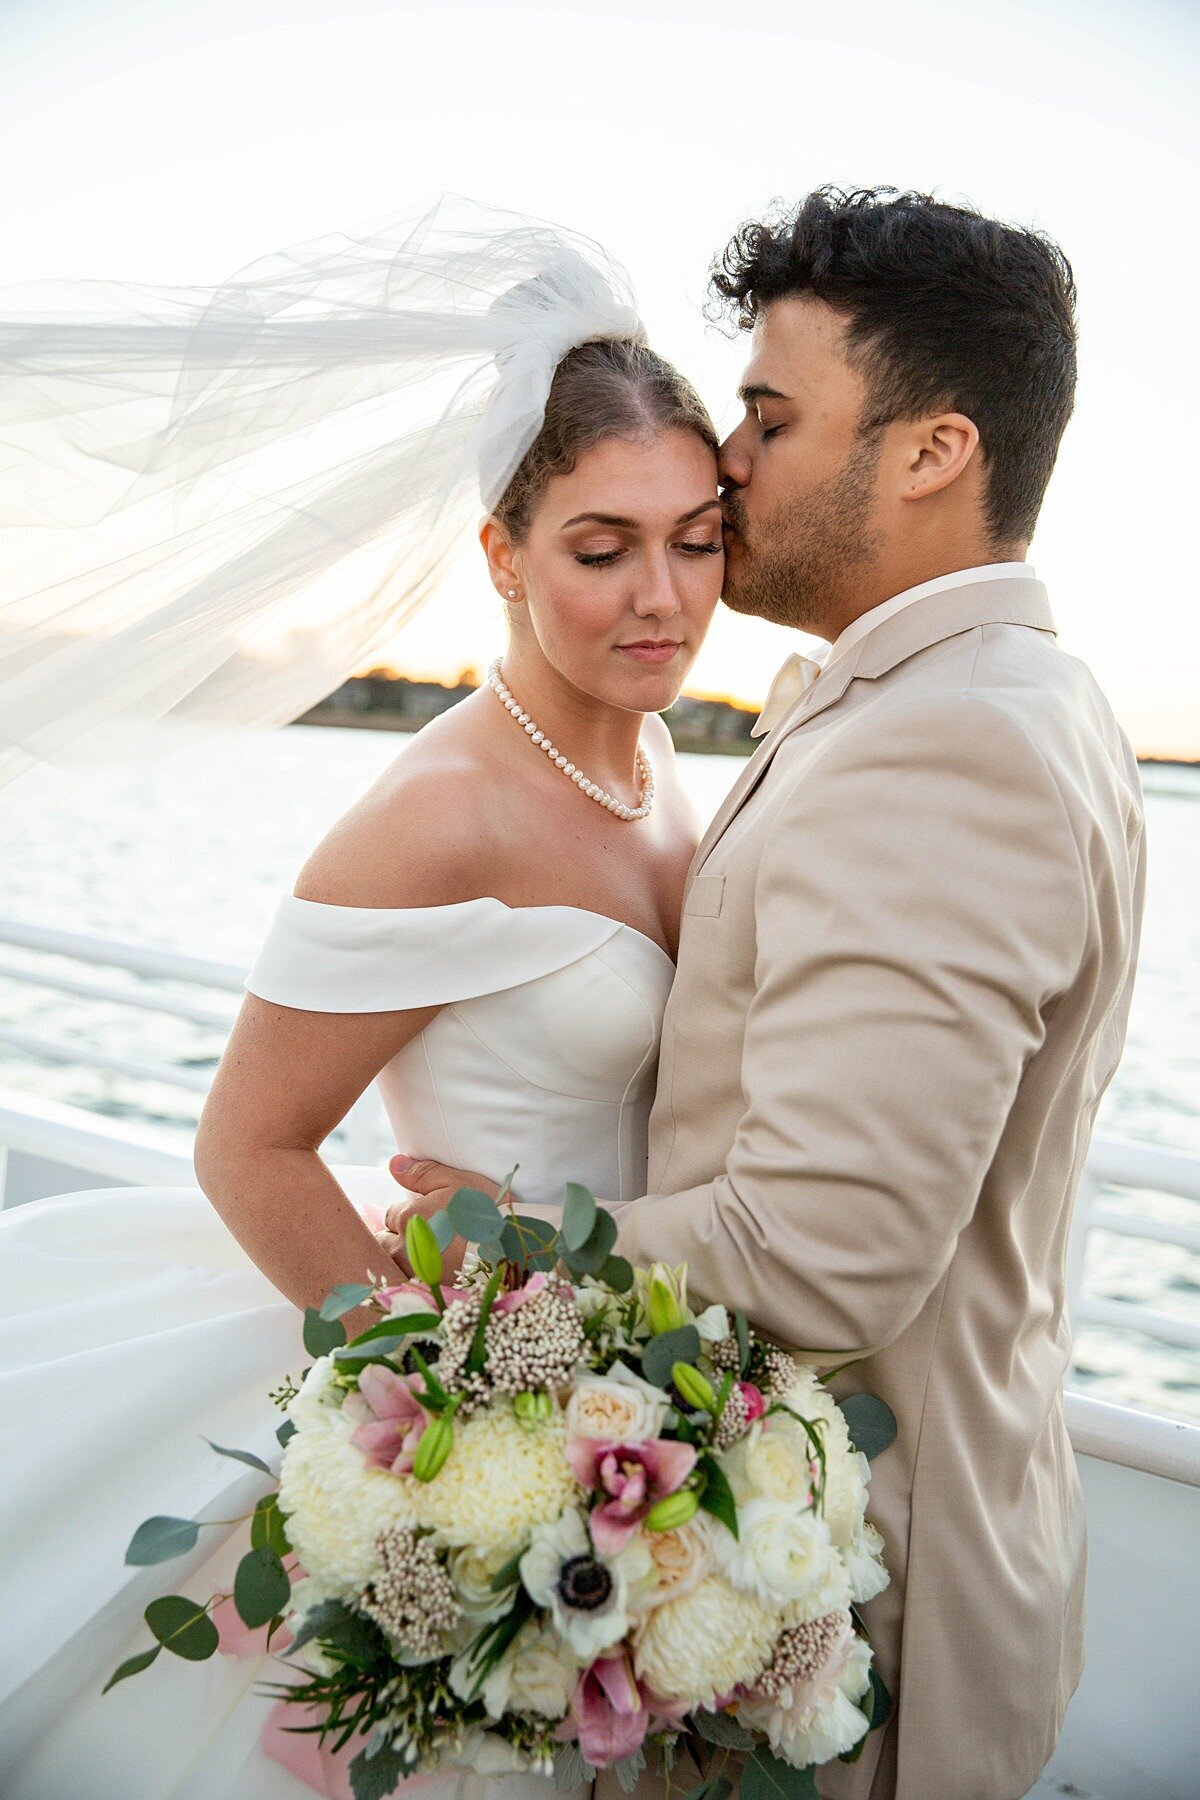 The groom, dressed in a light khaki suit, kisses the bride's temple as she looks down at her bouquet of white, ivory and dark pink flowers with her white dress and veil blowing in the ocean breeze